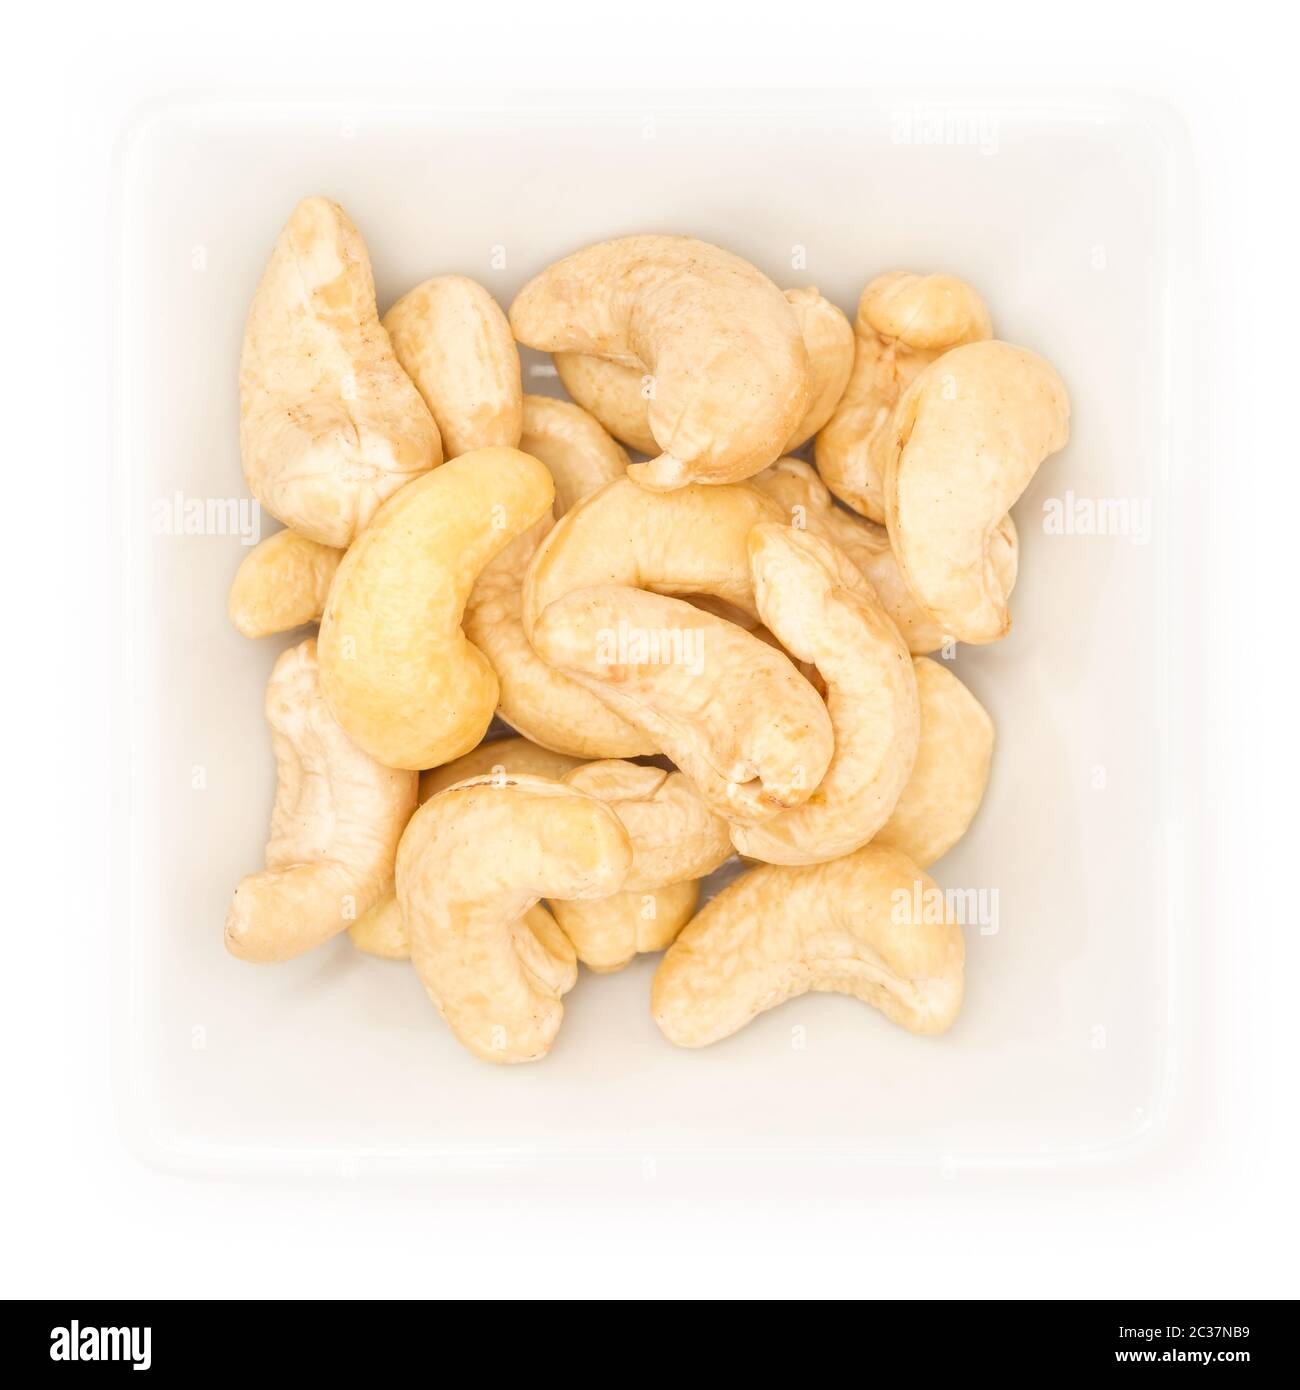 Cashew nut in a white square bowl in top view Stock Photo